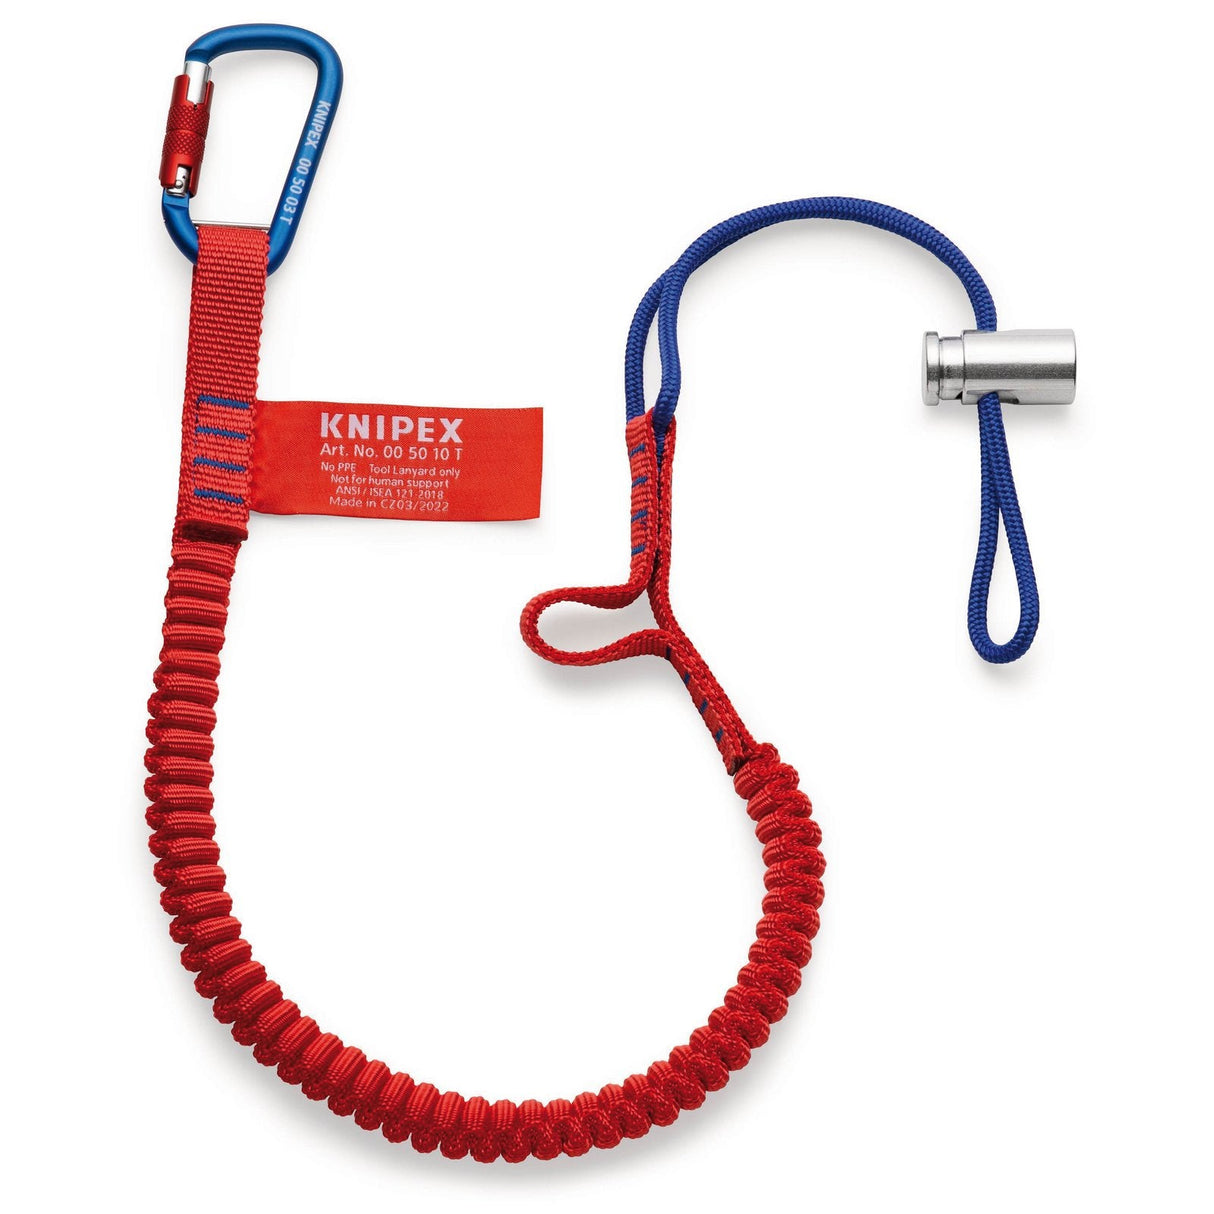 Draper Knipex 00 50 12 T Bk Lanyard With Fixated Carabiner - 00 50 12 T BK - Farming Parts